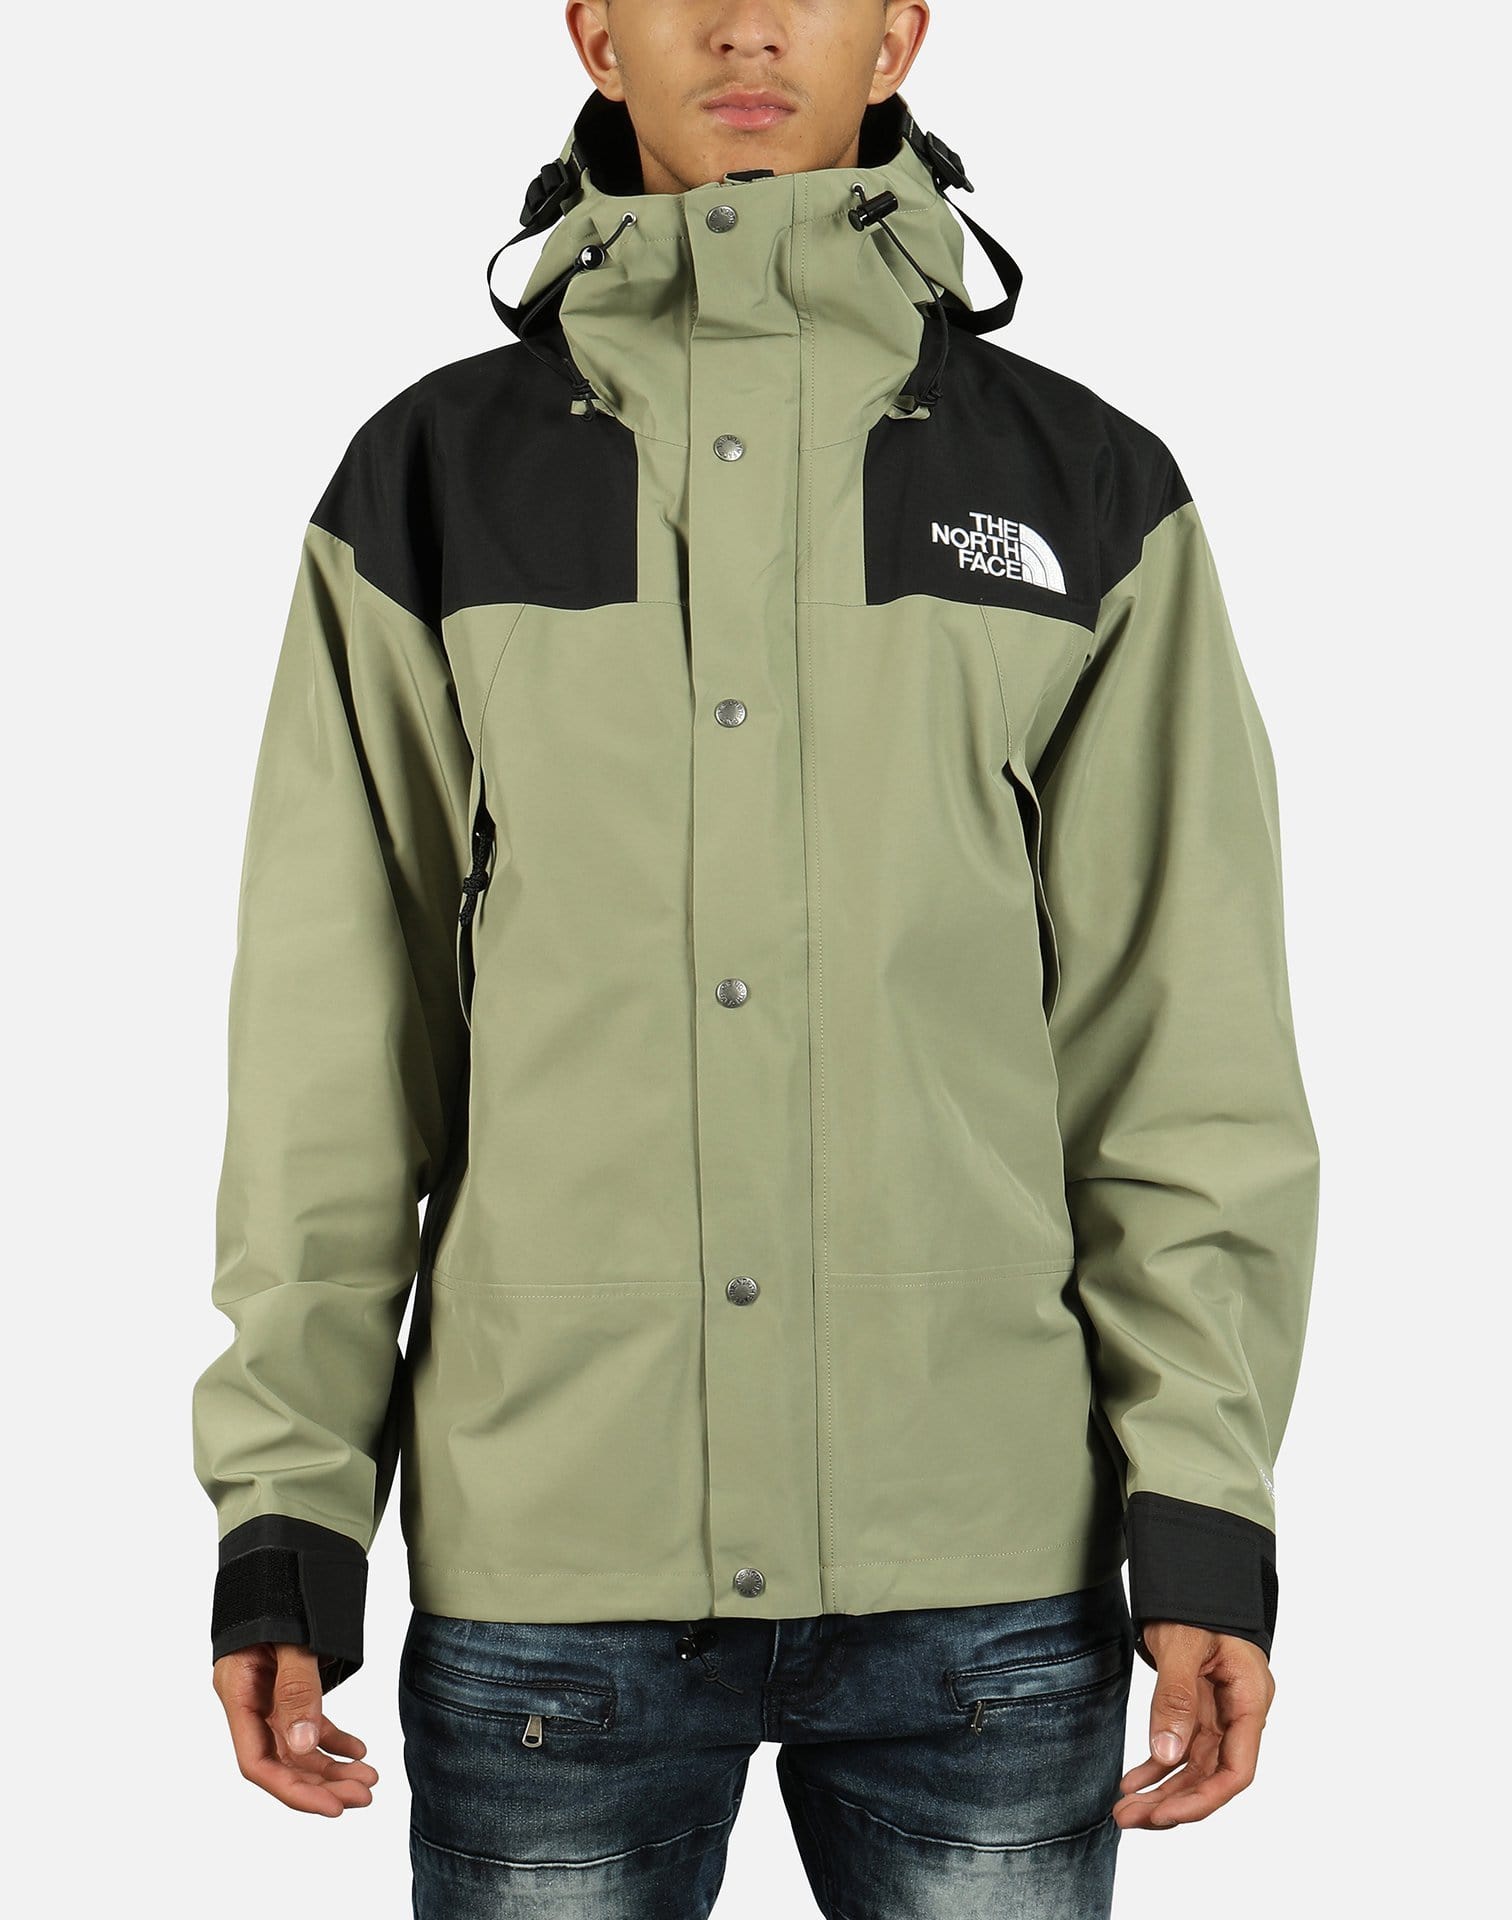 The North Face 1990 MOUNTAIN JACKET GTX裄丈を教えてください